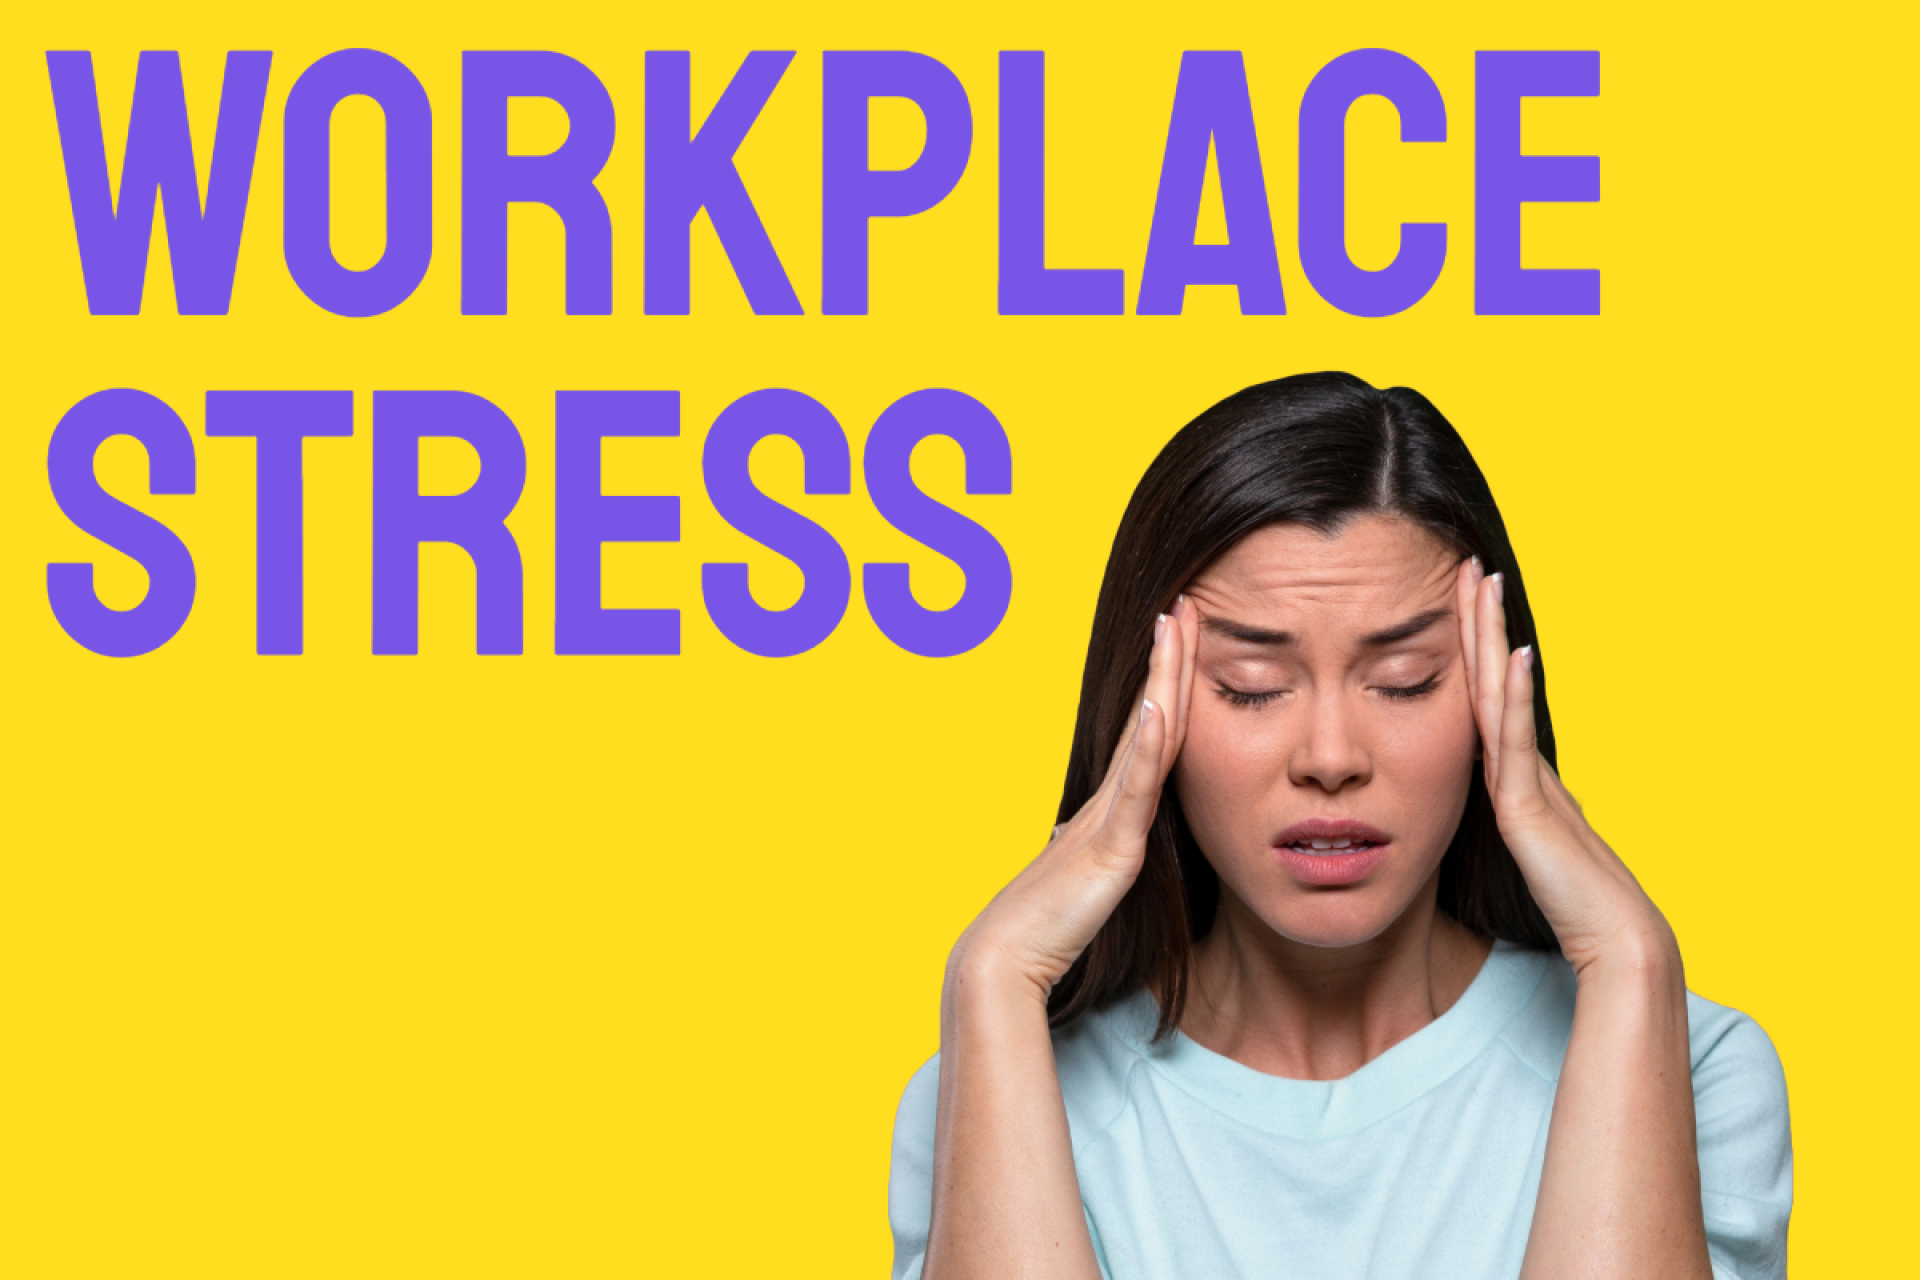 How outsourcing recruitment can reduce workplace stress